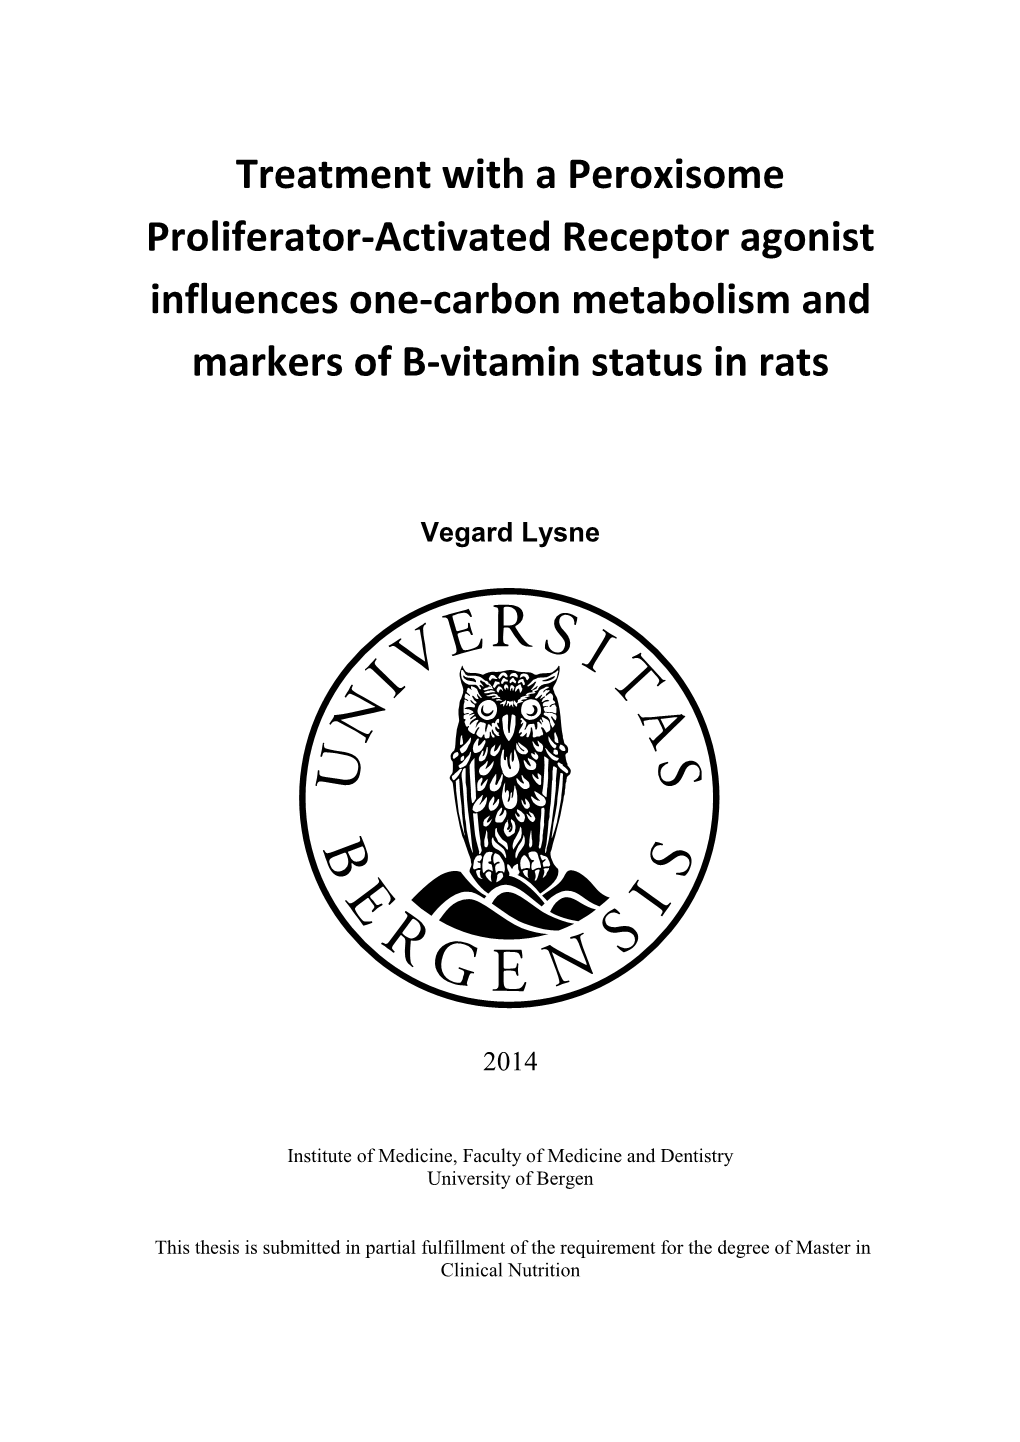 Treatment with a Peroxisome Proliferator-Activated Receptor Agonist Influences One-Carbon Metabolism and Markers of B-Vitamin Status in Rats